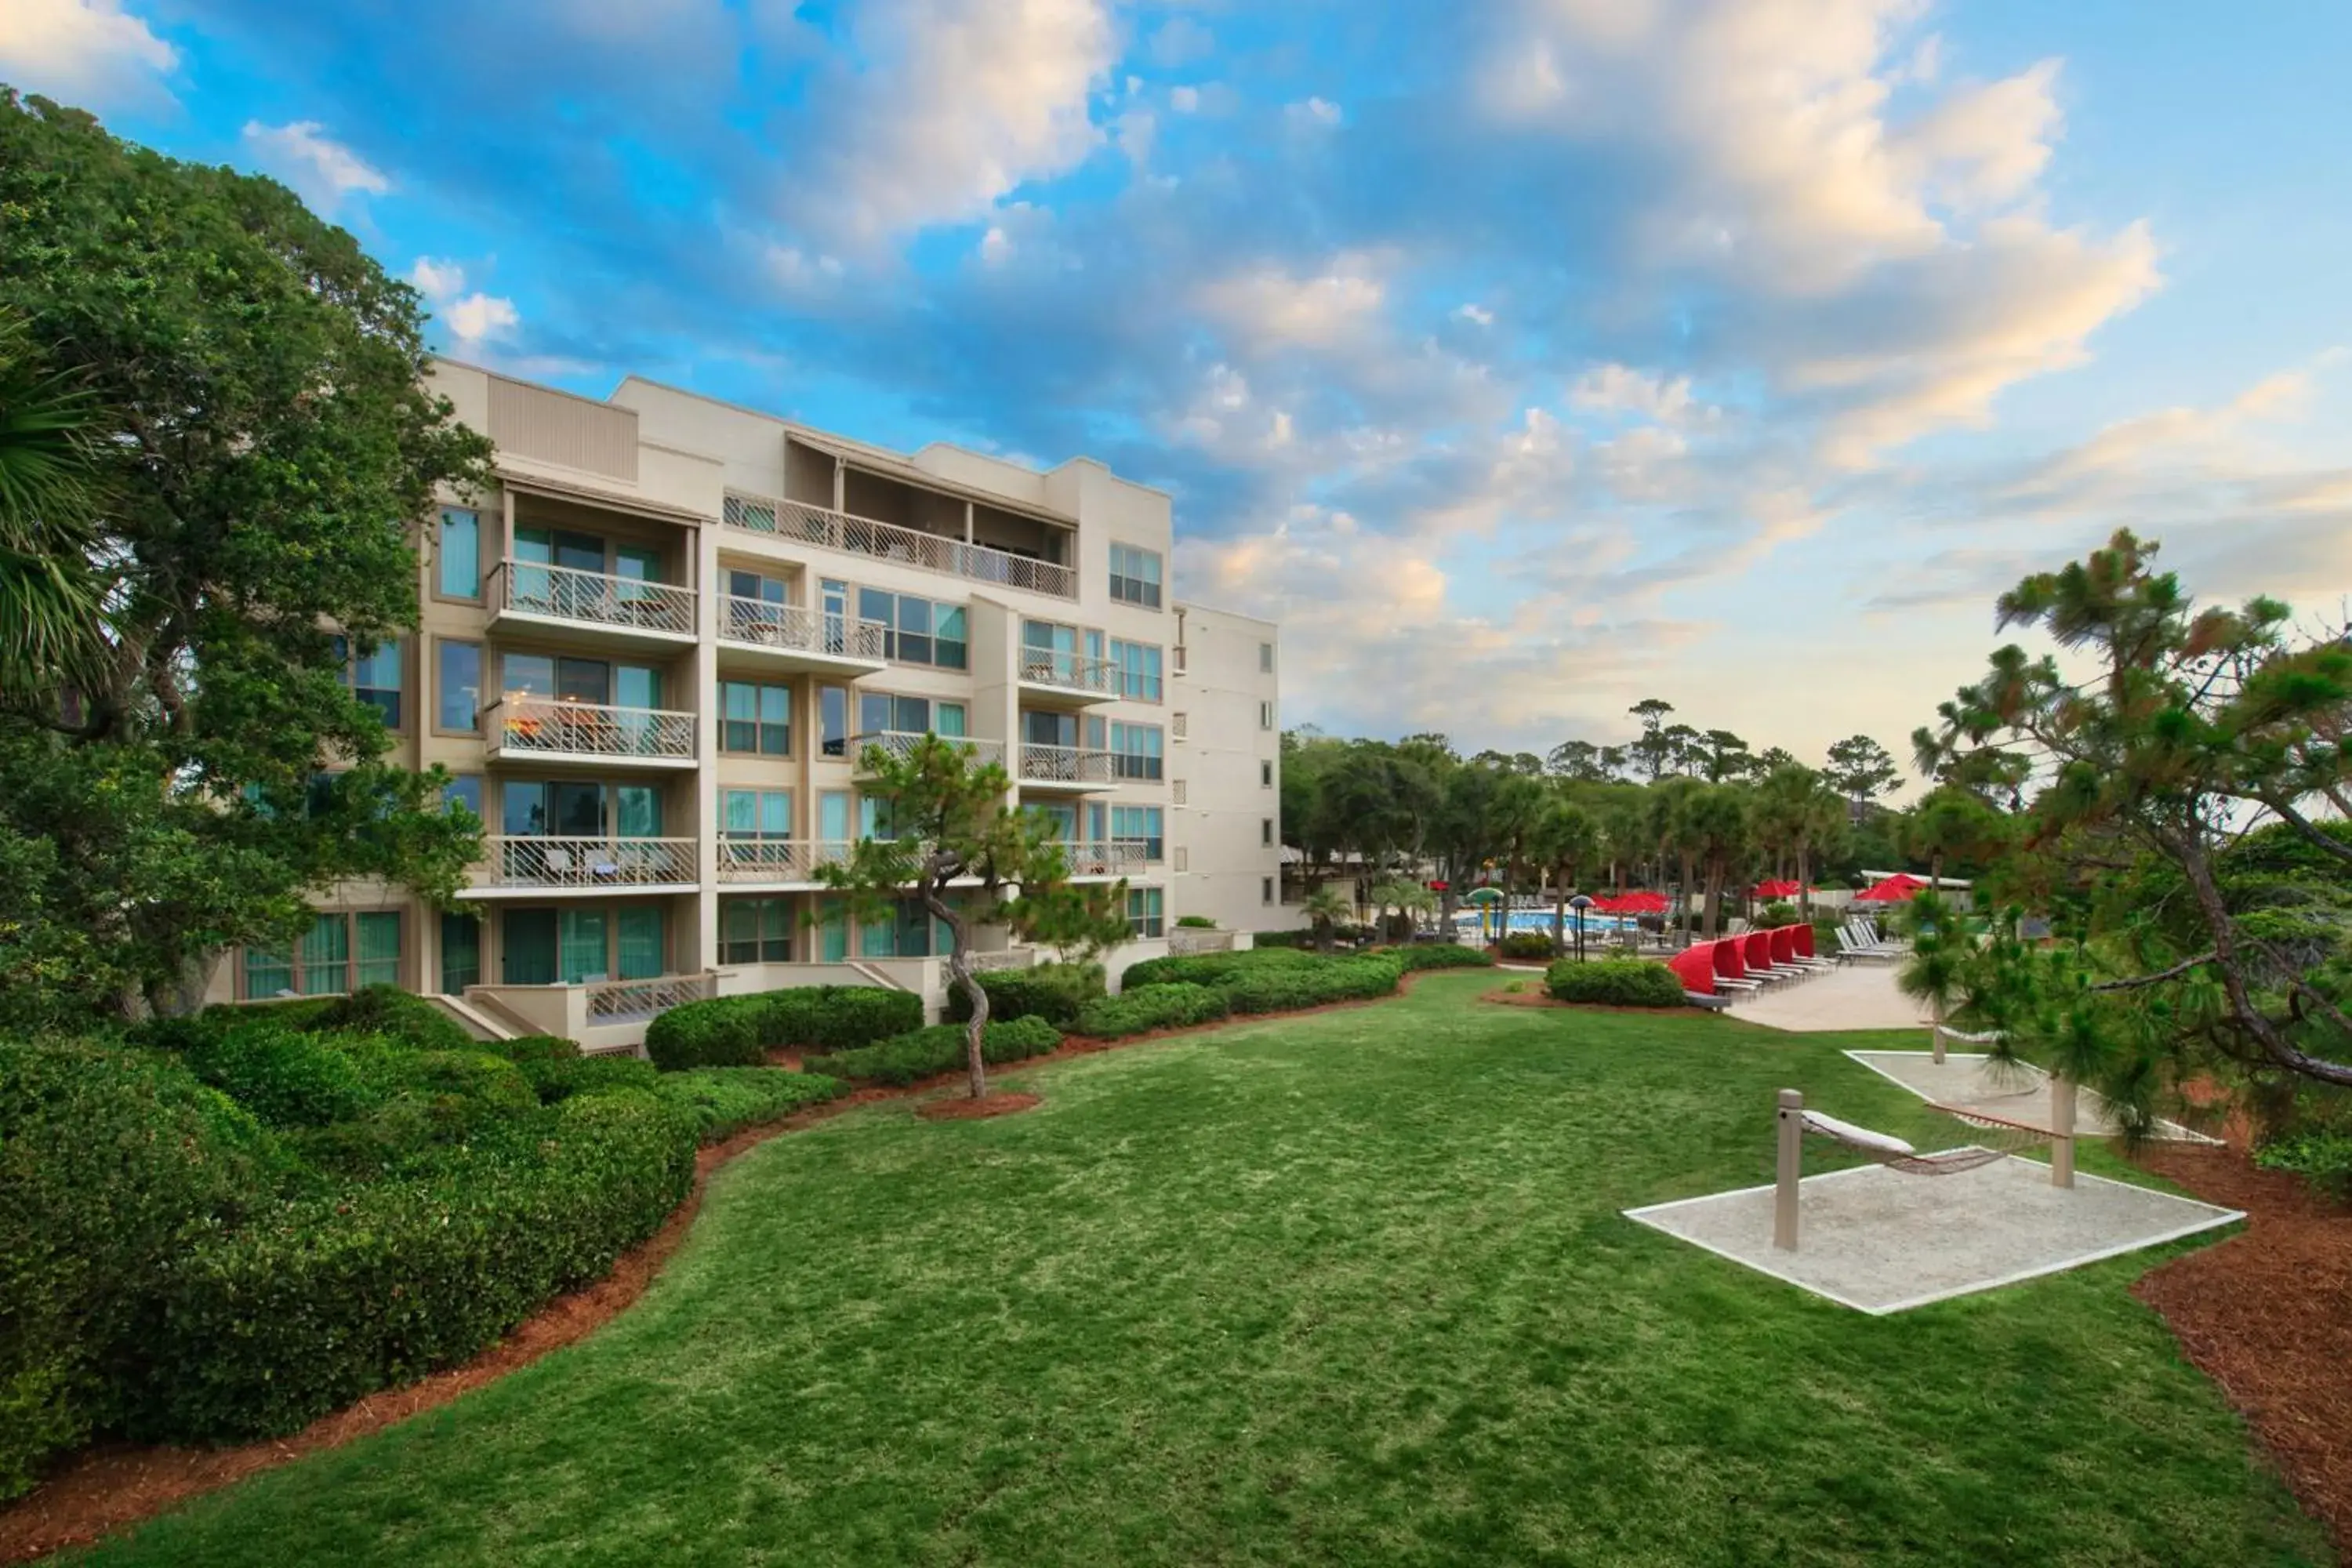 Property Building in Marriott's Monarch at Sea Pines